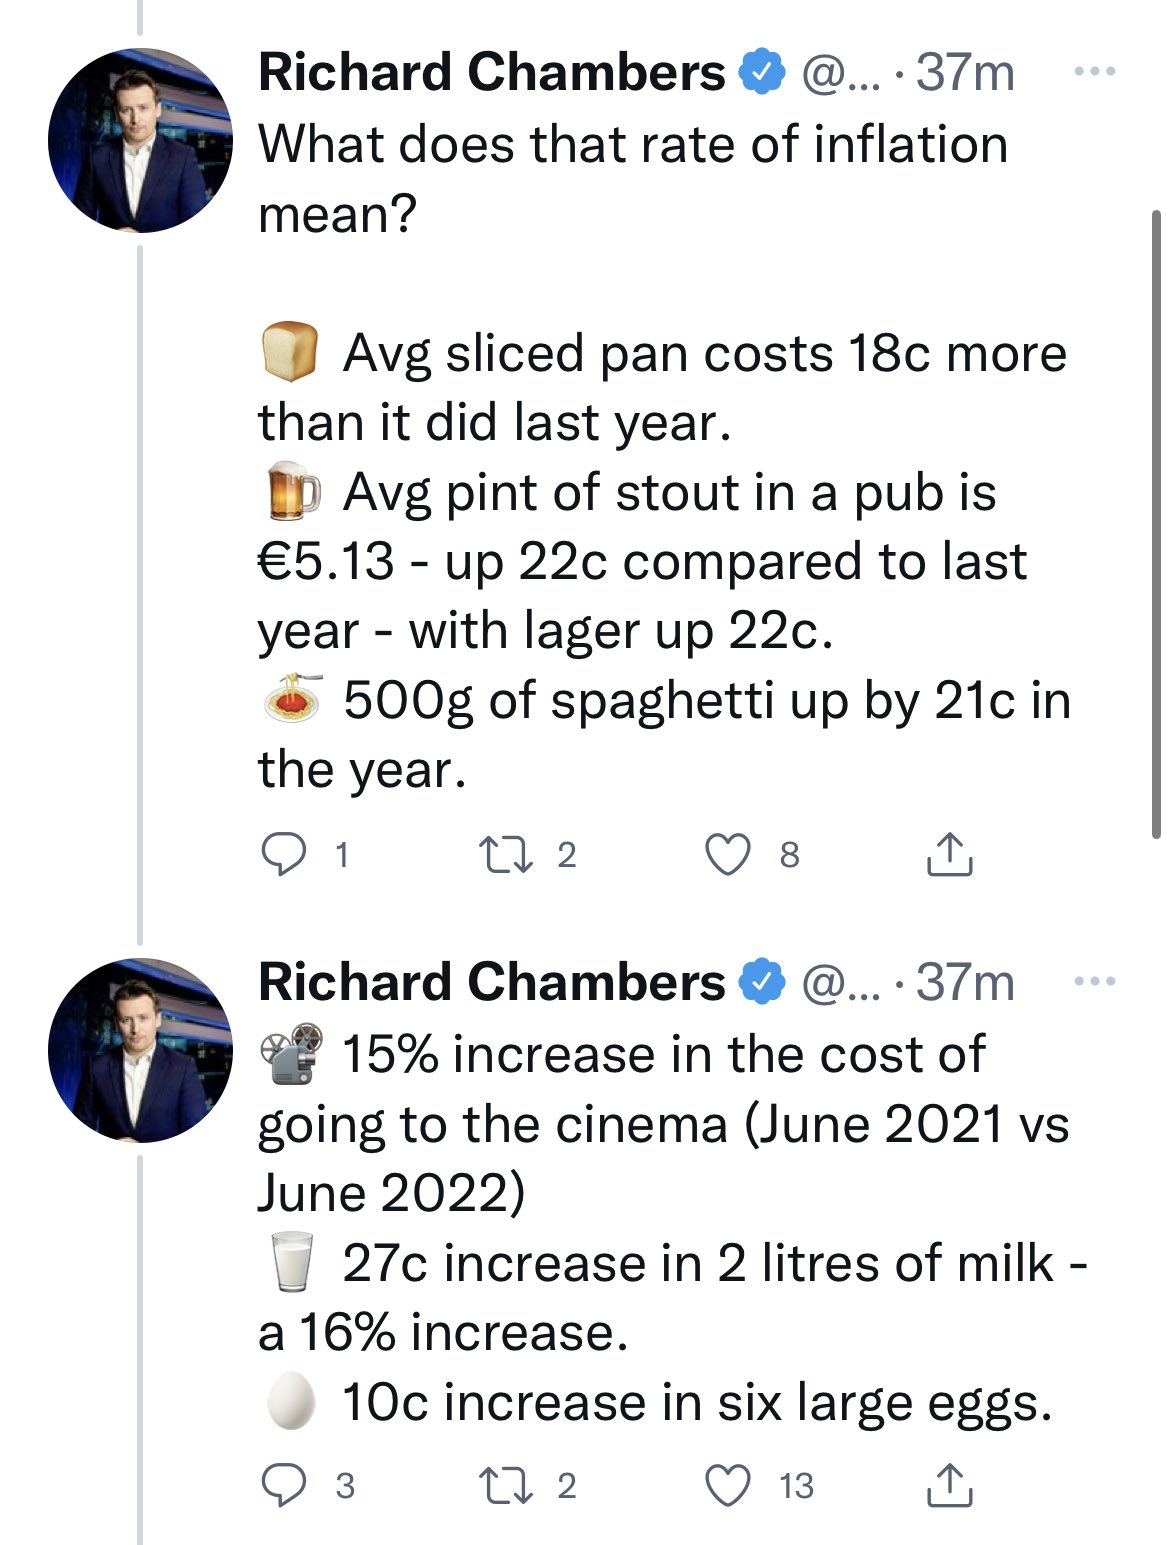 Richard Chambers Tweets: What does that rate of inflation mean?  🍞 Avg sliced pan costs 18c more than it did last year. 🍺 Avg pint of stout in a pub is €5.13 - up 22c compared to last year - with lager up 22c. 🍝 500g of spaghetti up by 21c in the year. 📽️ 15% increase in the cost of going to the cinema (June 2021 vs June 2022) 🥛 27c increase in 2 litres of milk - a 16% increase. 🥚 10c increase in six large eggs.